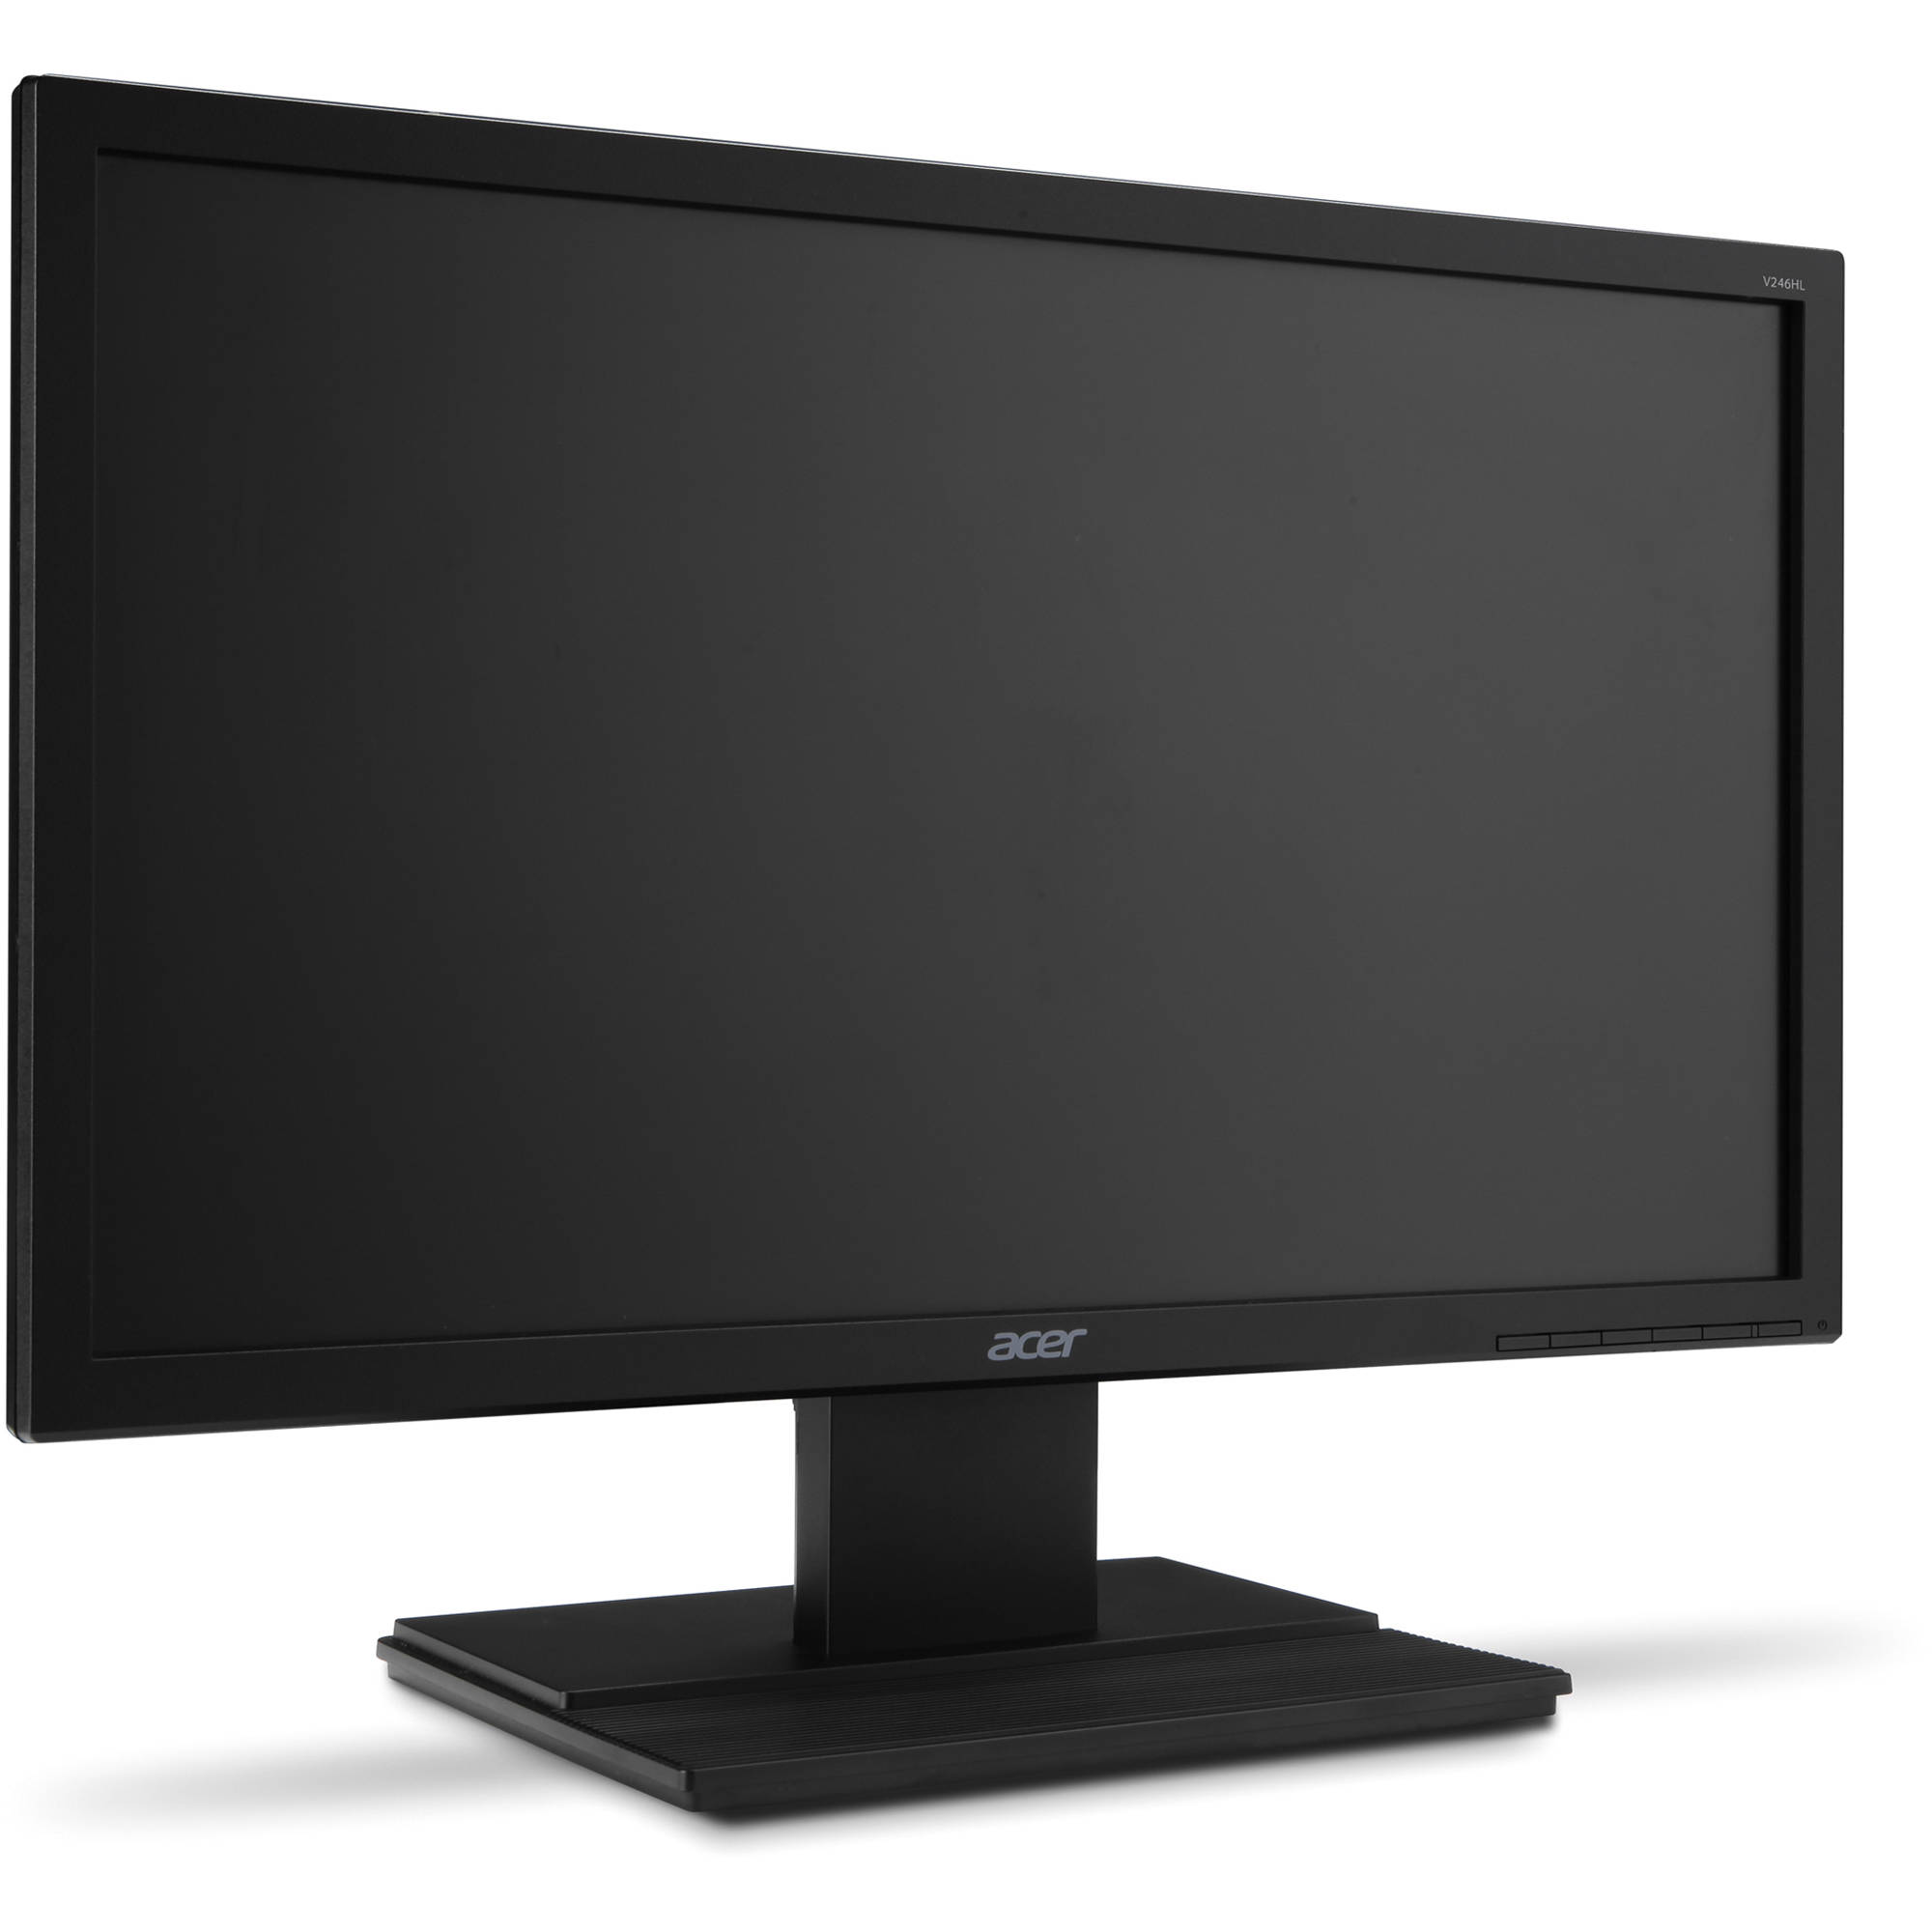 Acer Recertified: Acer 24" Widescreen LCD Monitor Display Full HD 1920